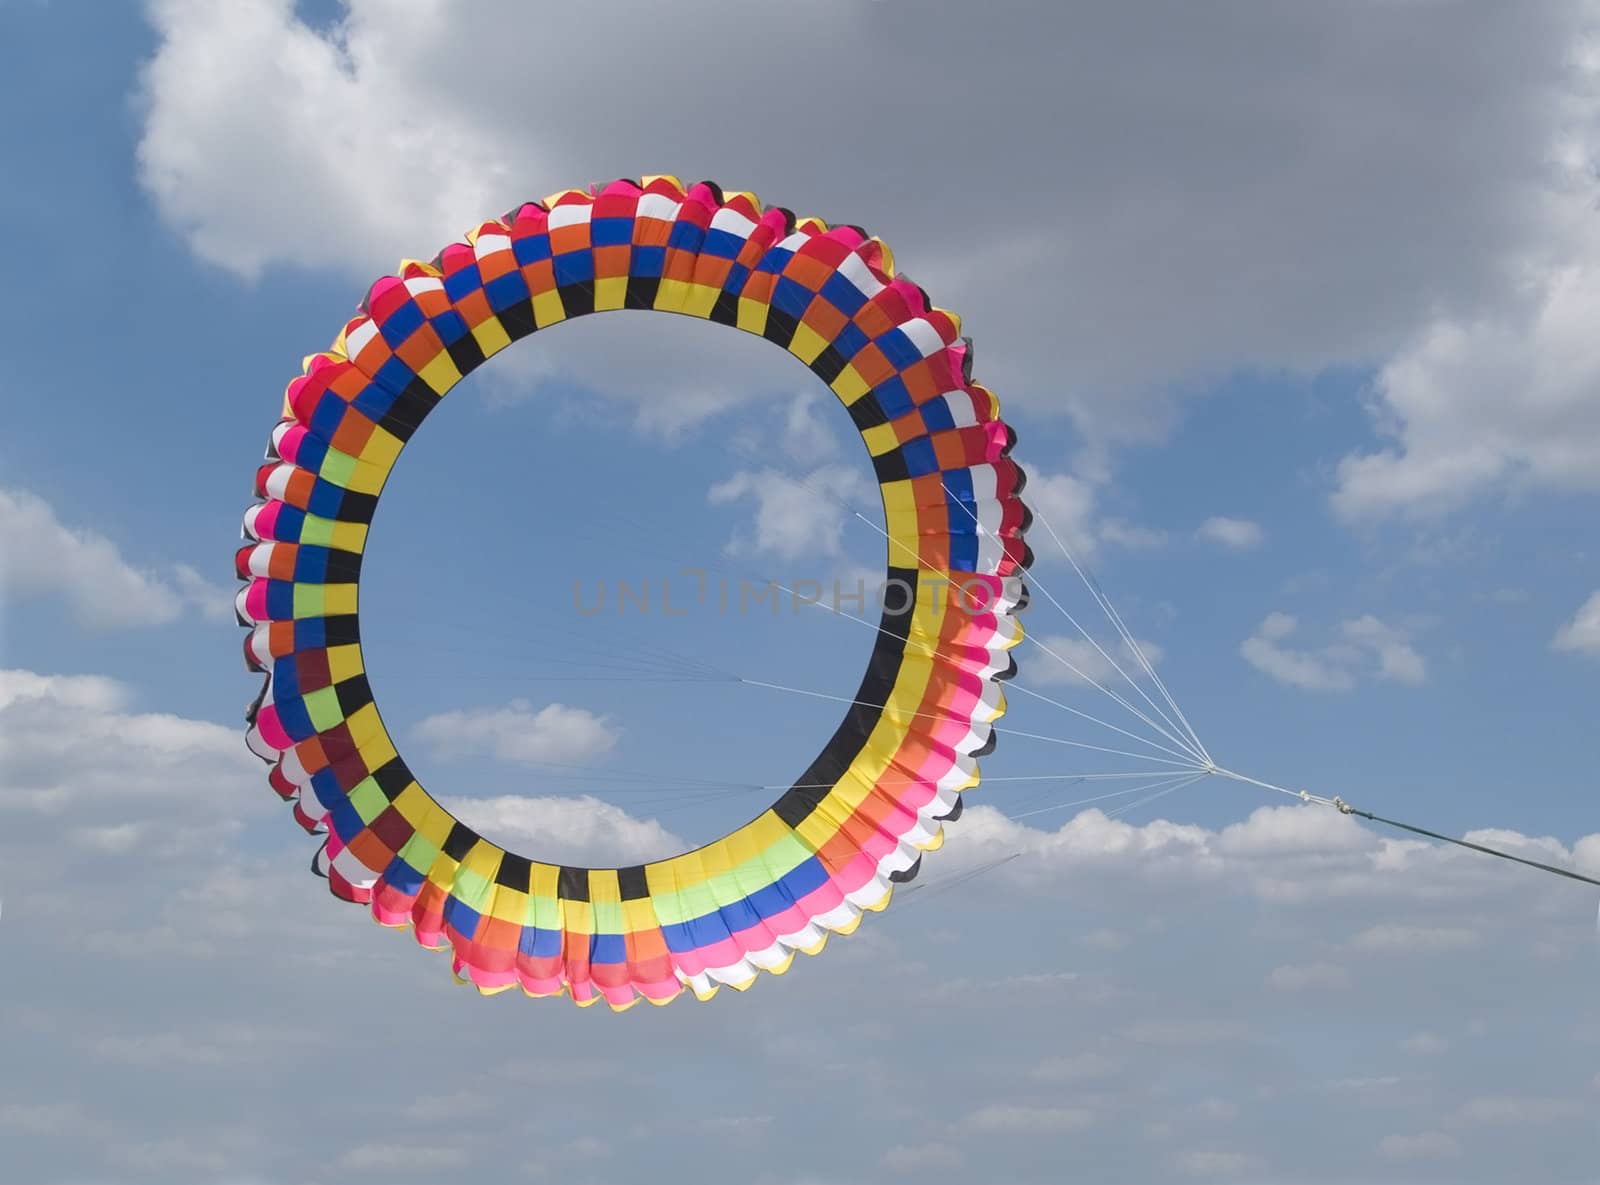 Very large, colourful, circular kite on a cloudy sky background.